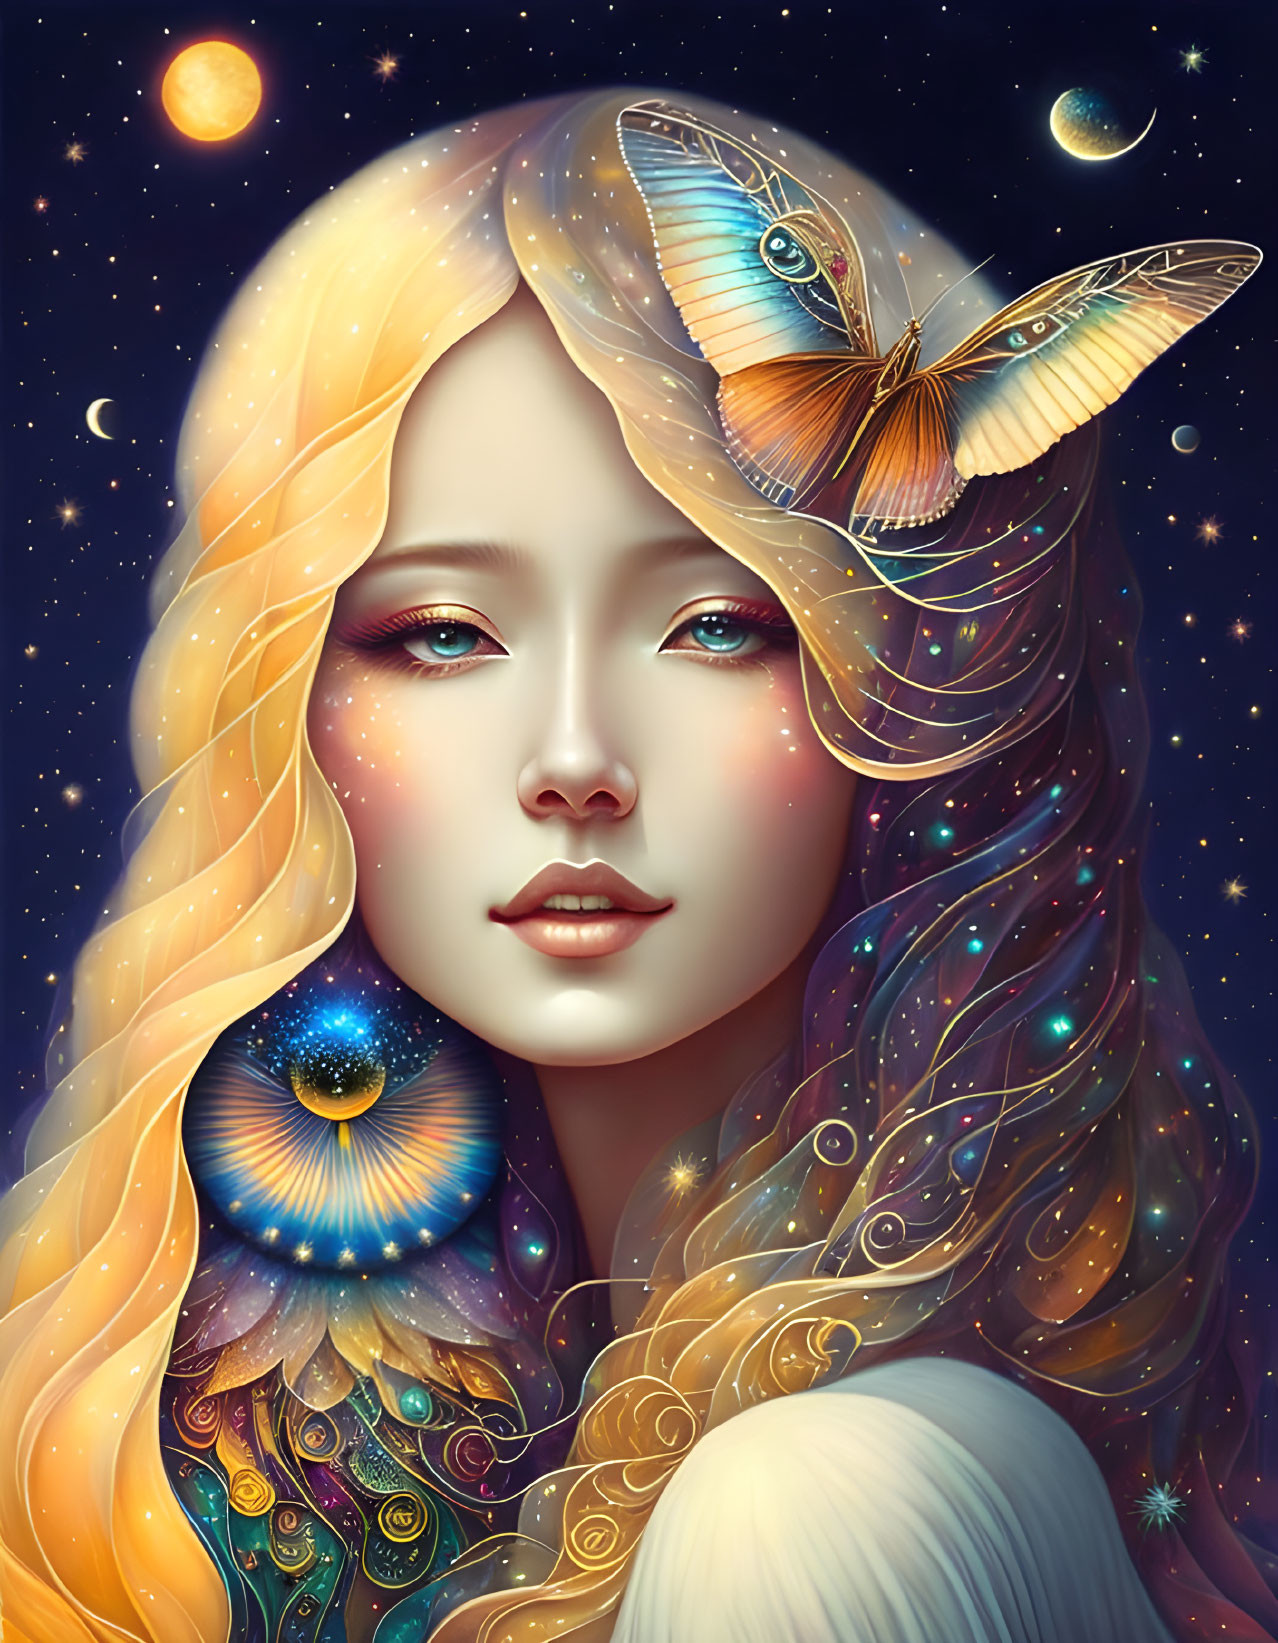 Illustrated woman with ethereal features, planets, butterfly, and peacock feather pattern.